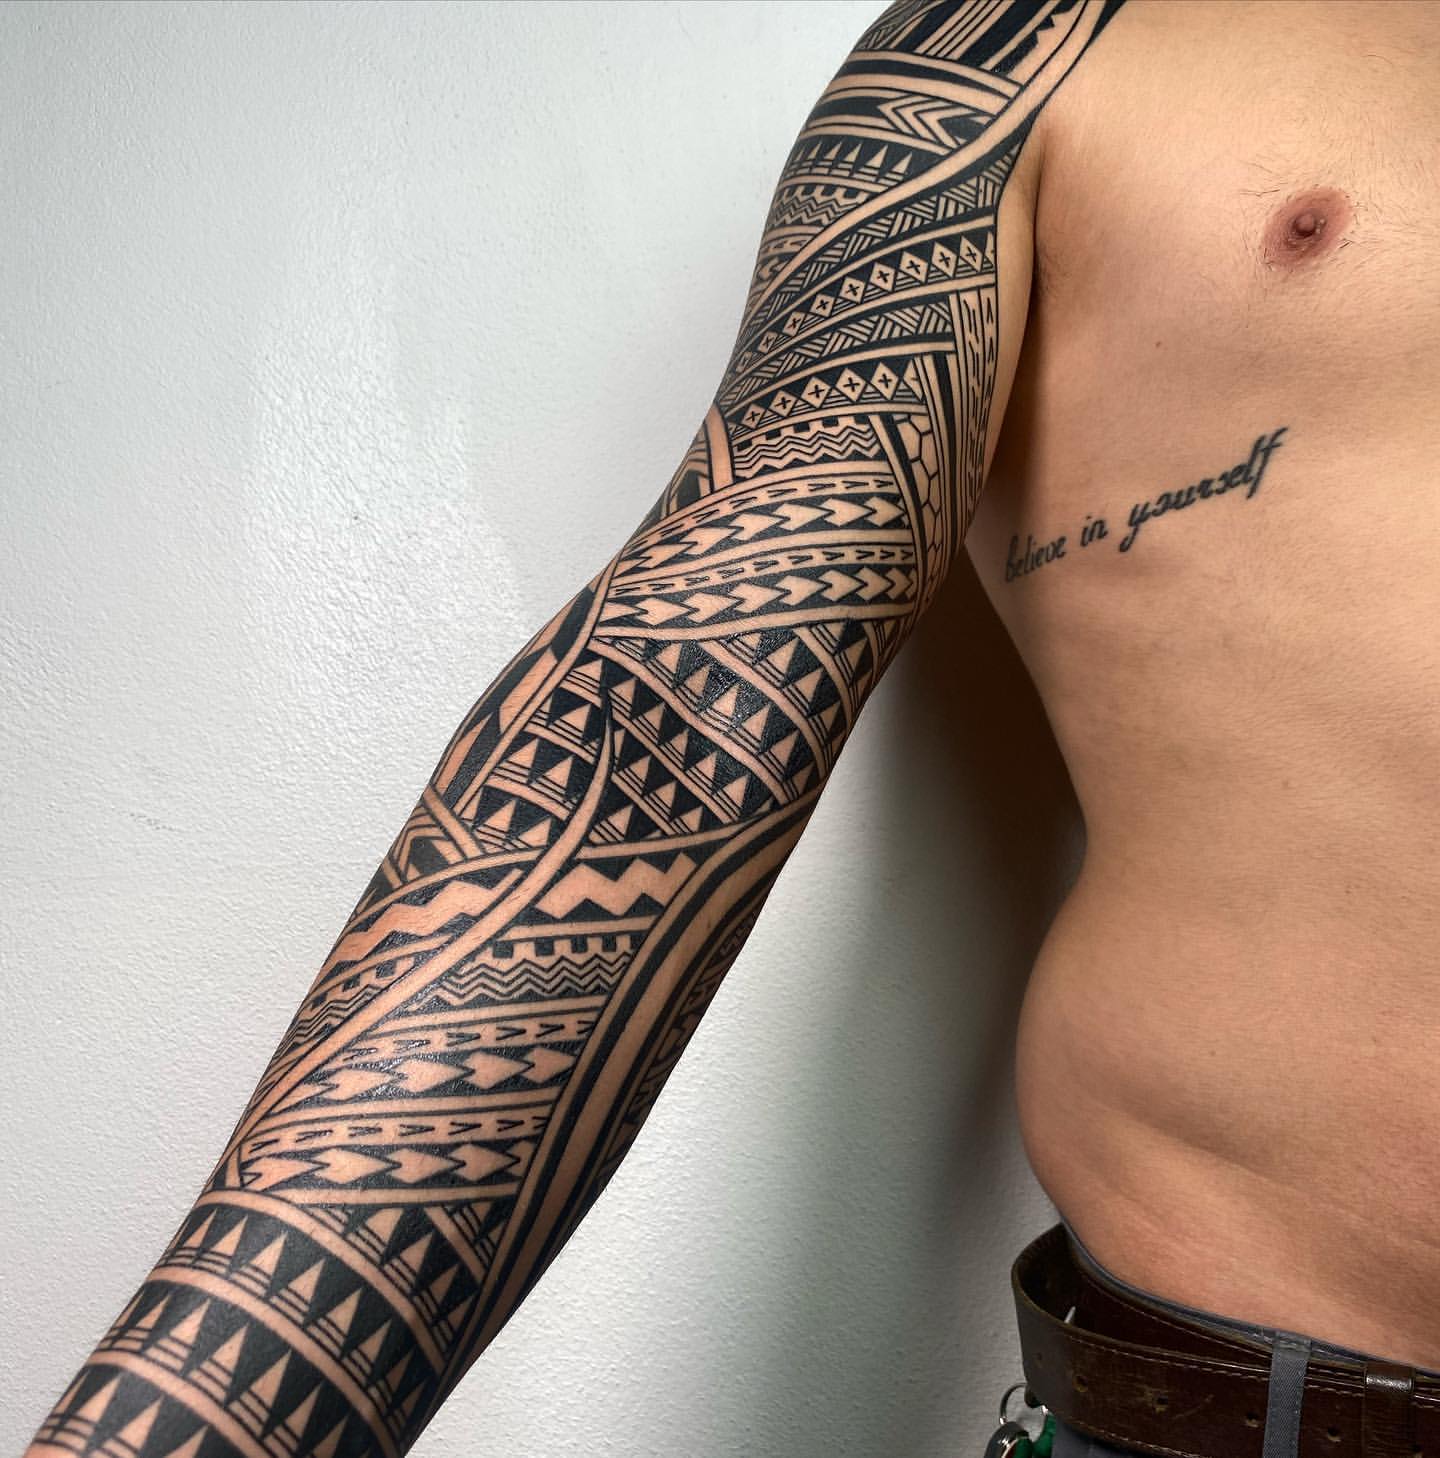 28 Impressive Tribal Tattoo Ideas for Men & Women to Inspire You in 2023